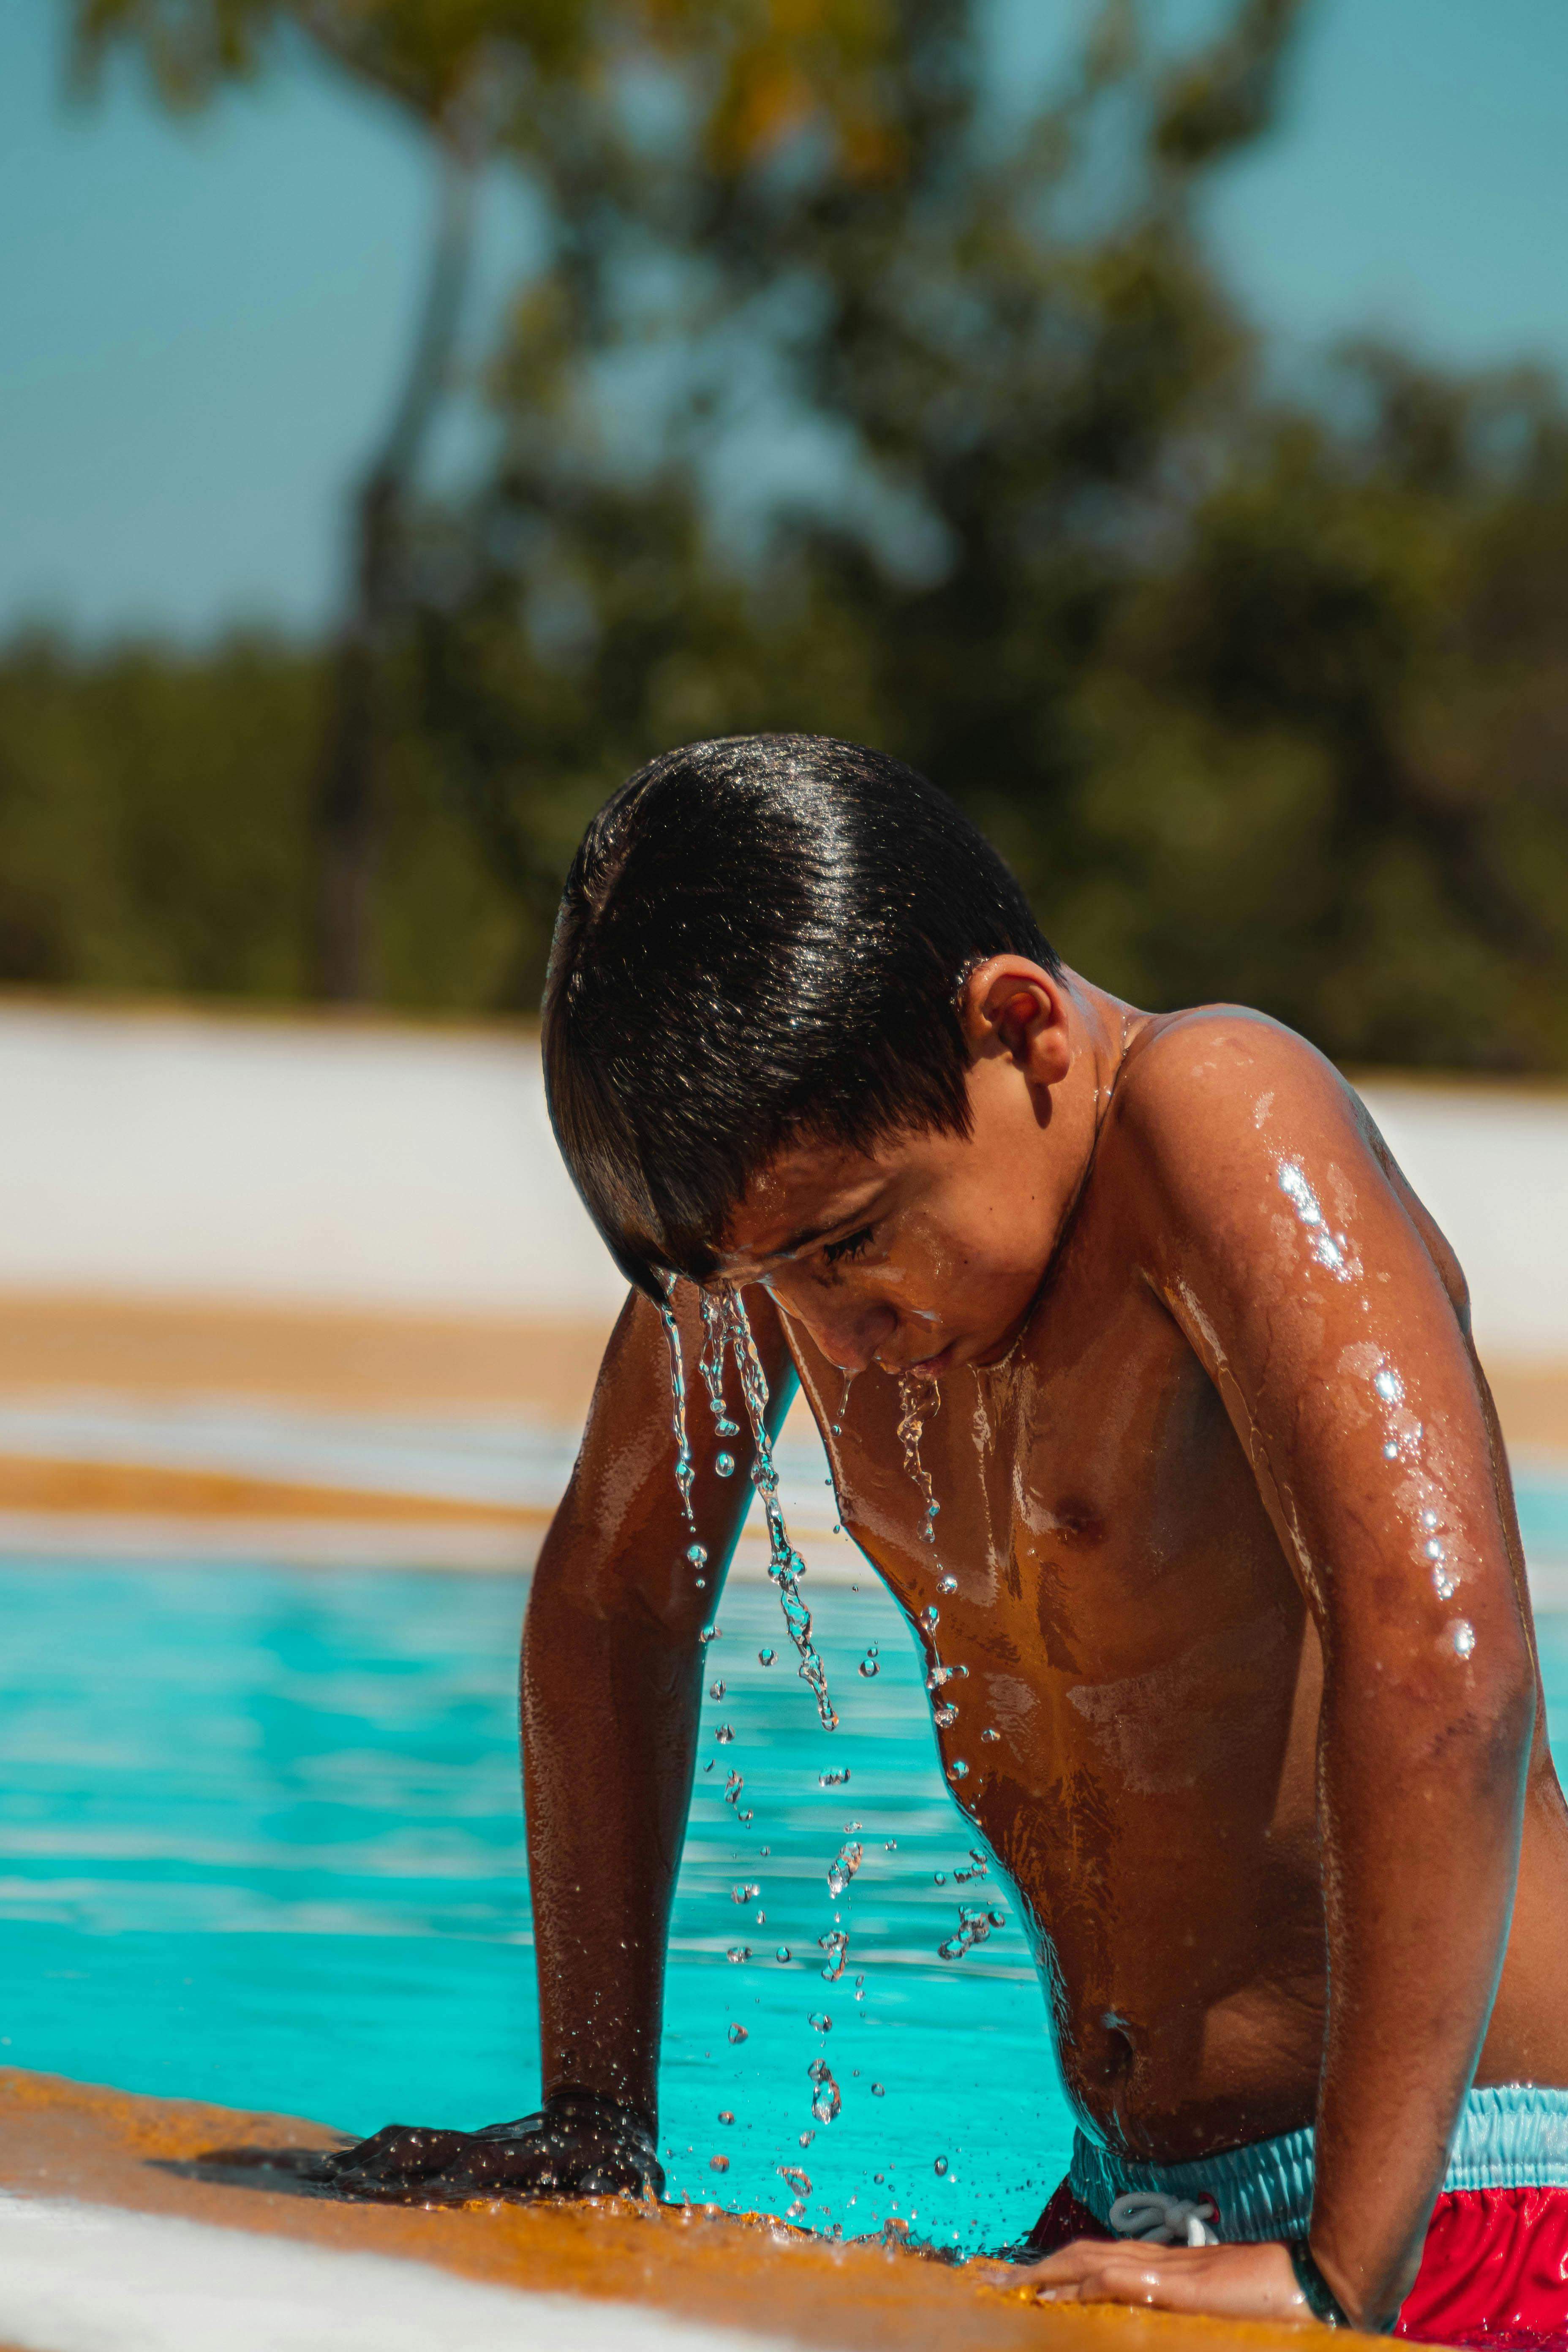 a shirtless boy coming out of the swimming pool with dripping water